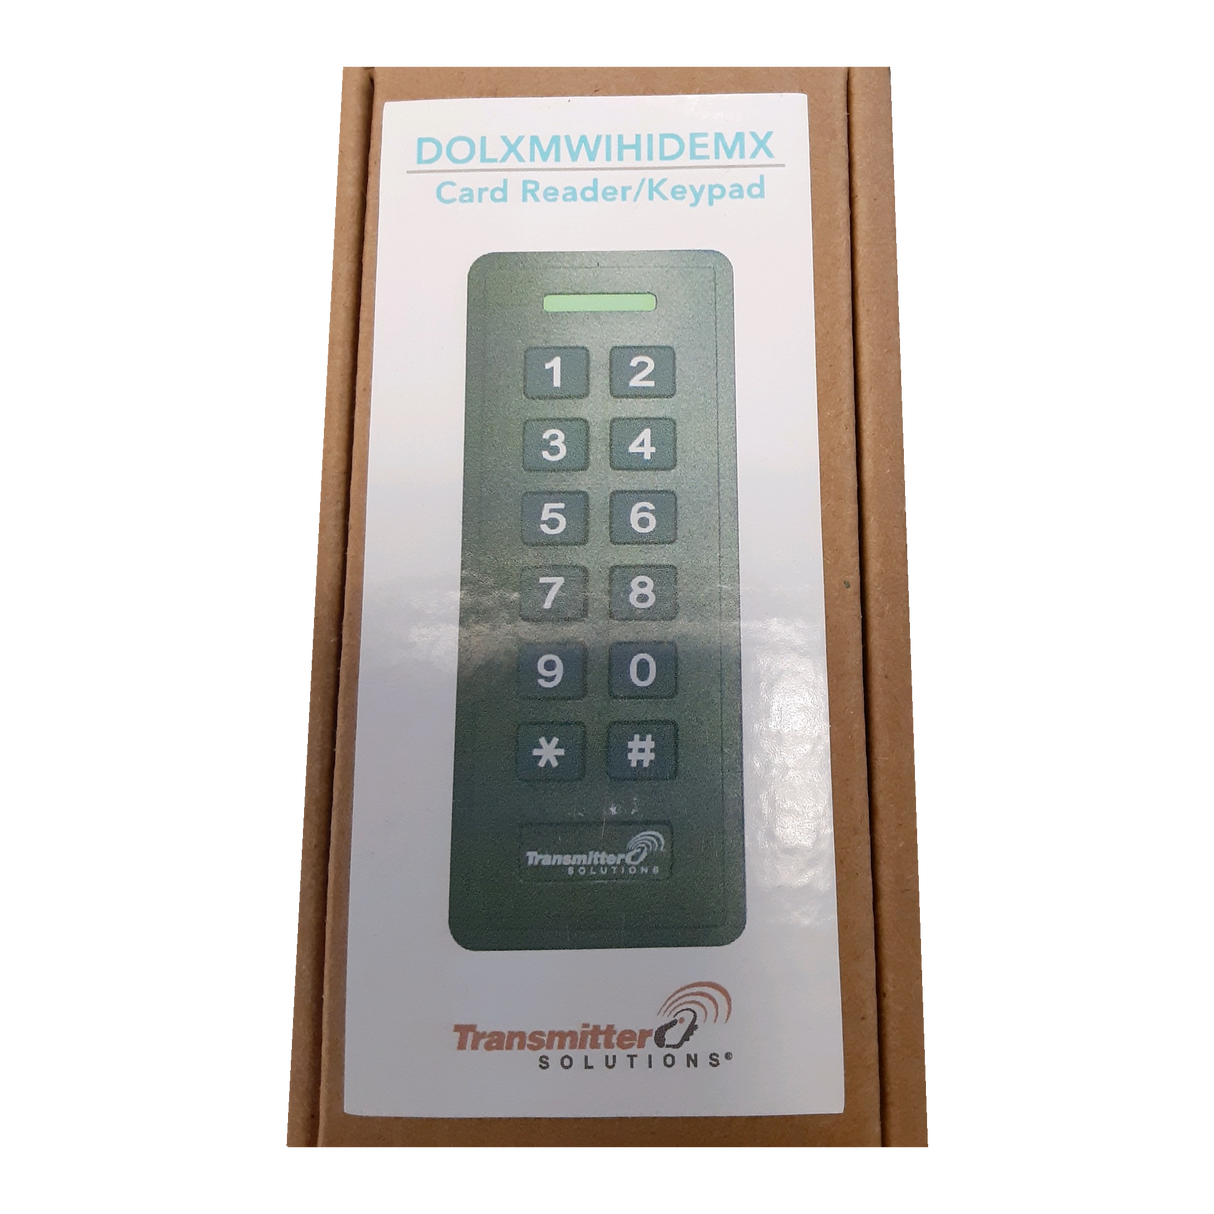 Transmitter Solutions DOLXMWIHIDEM Card Reader With Keypad